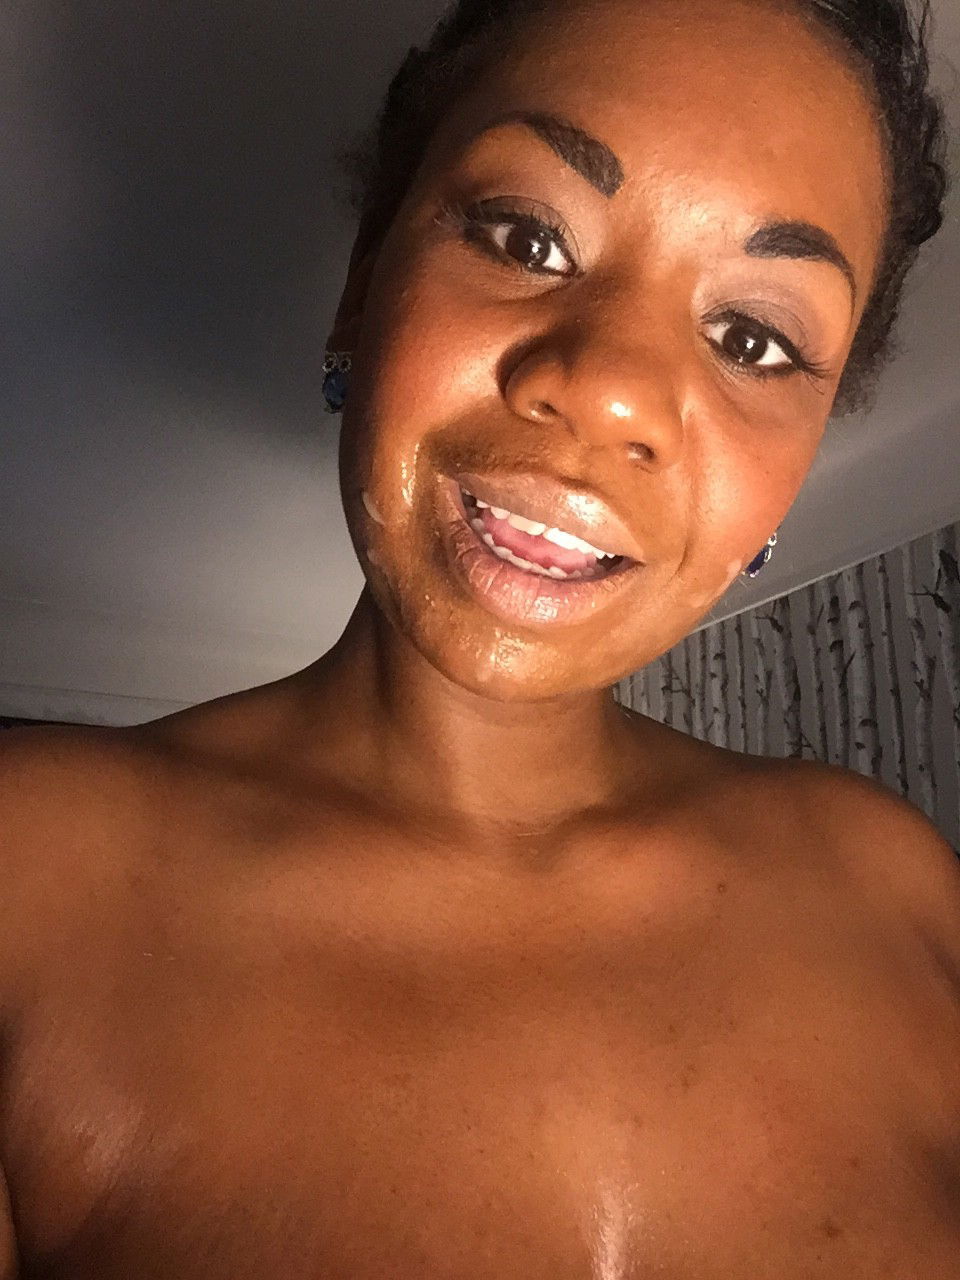 Photo by TrophyWomen with the username @TrophyWomen, who is a verified user,  September 9, 2018 at 11:04 PM and the text says 'jessicagrabbit:

I just can’t resist a in my ….mmmm all that yummy 

 #jessica  #jessicagrabbit  #jesica  #grabbit  #ebony  #porn  #top  #ebony  #pornstar  #best  #ebony  #pornstar  #ebony  #babe  #dimepiece  #cumshot  #cum  #on  #tits  #cumslut  #ebony..'